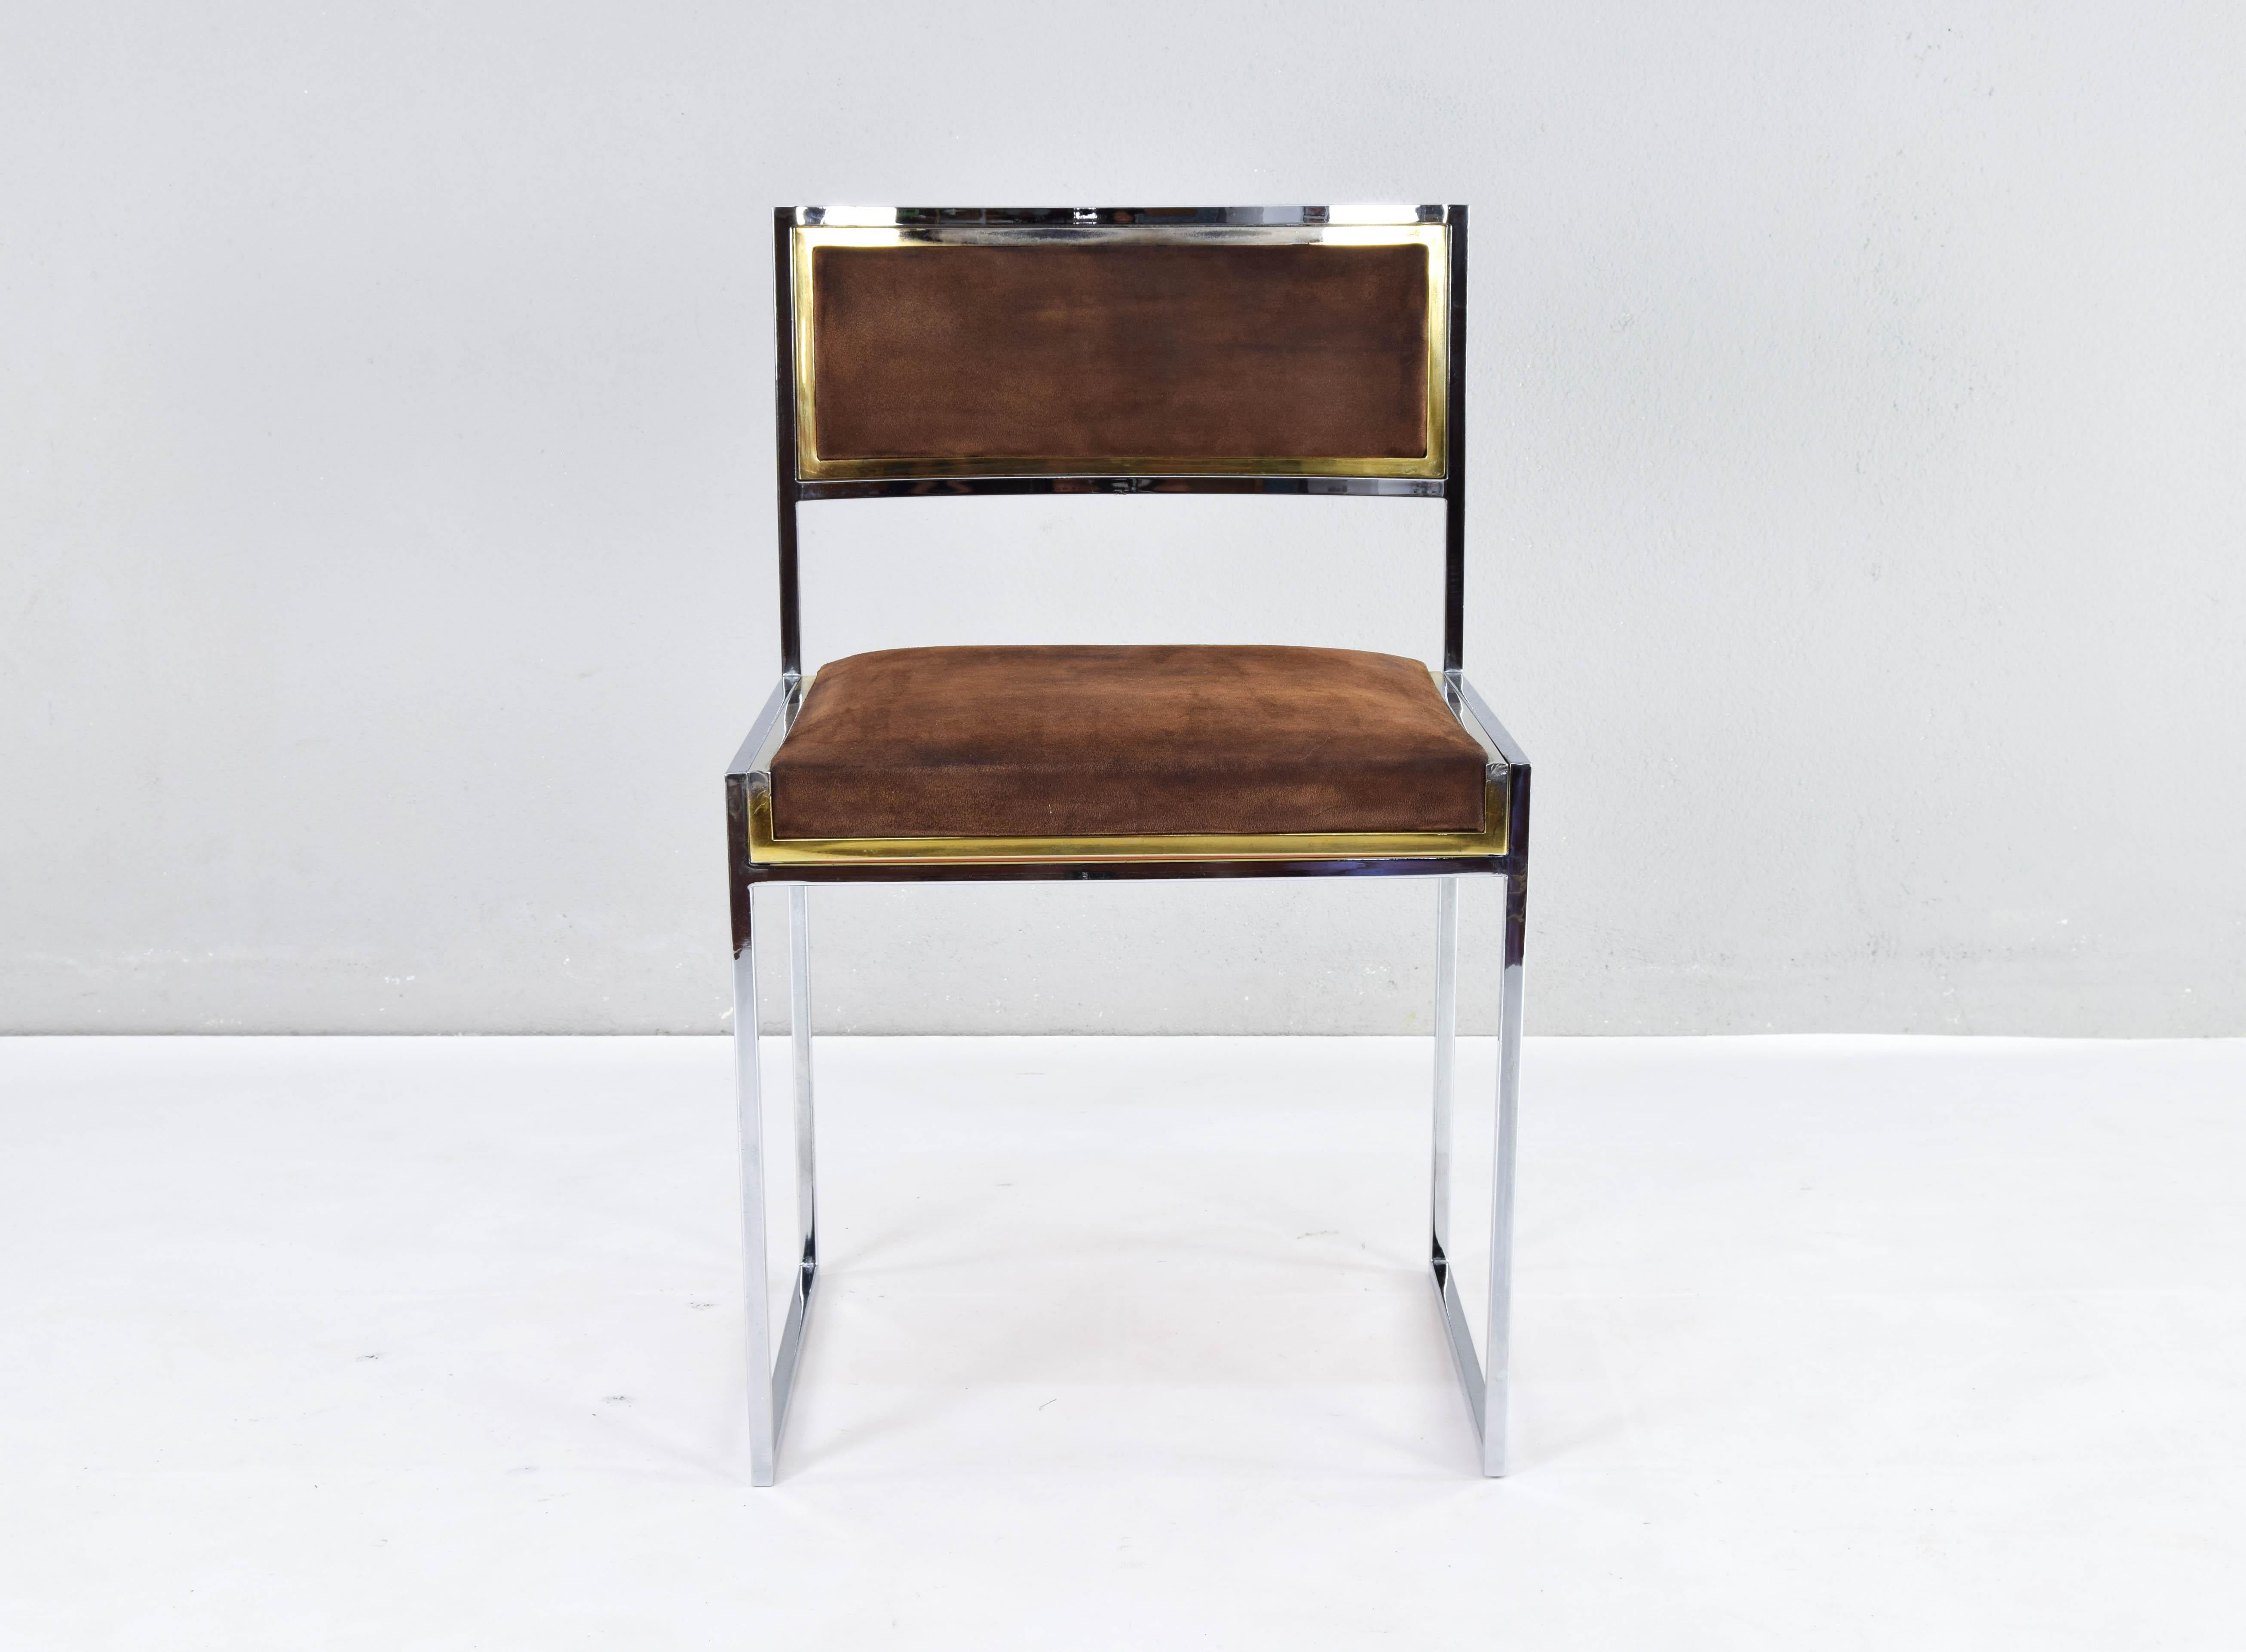 Chair designed by Willy Rizzo and produced in Italy in the 70's.
Structure in chromed and brass-plated steel and upholstery in brown suede.
The parts with a brass finish present some areas of color fading, as is to be expected from these